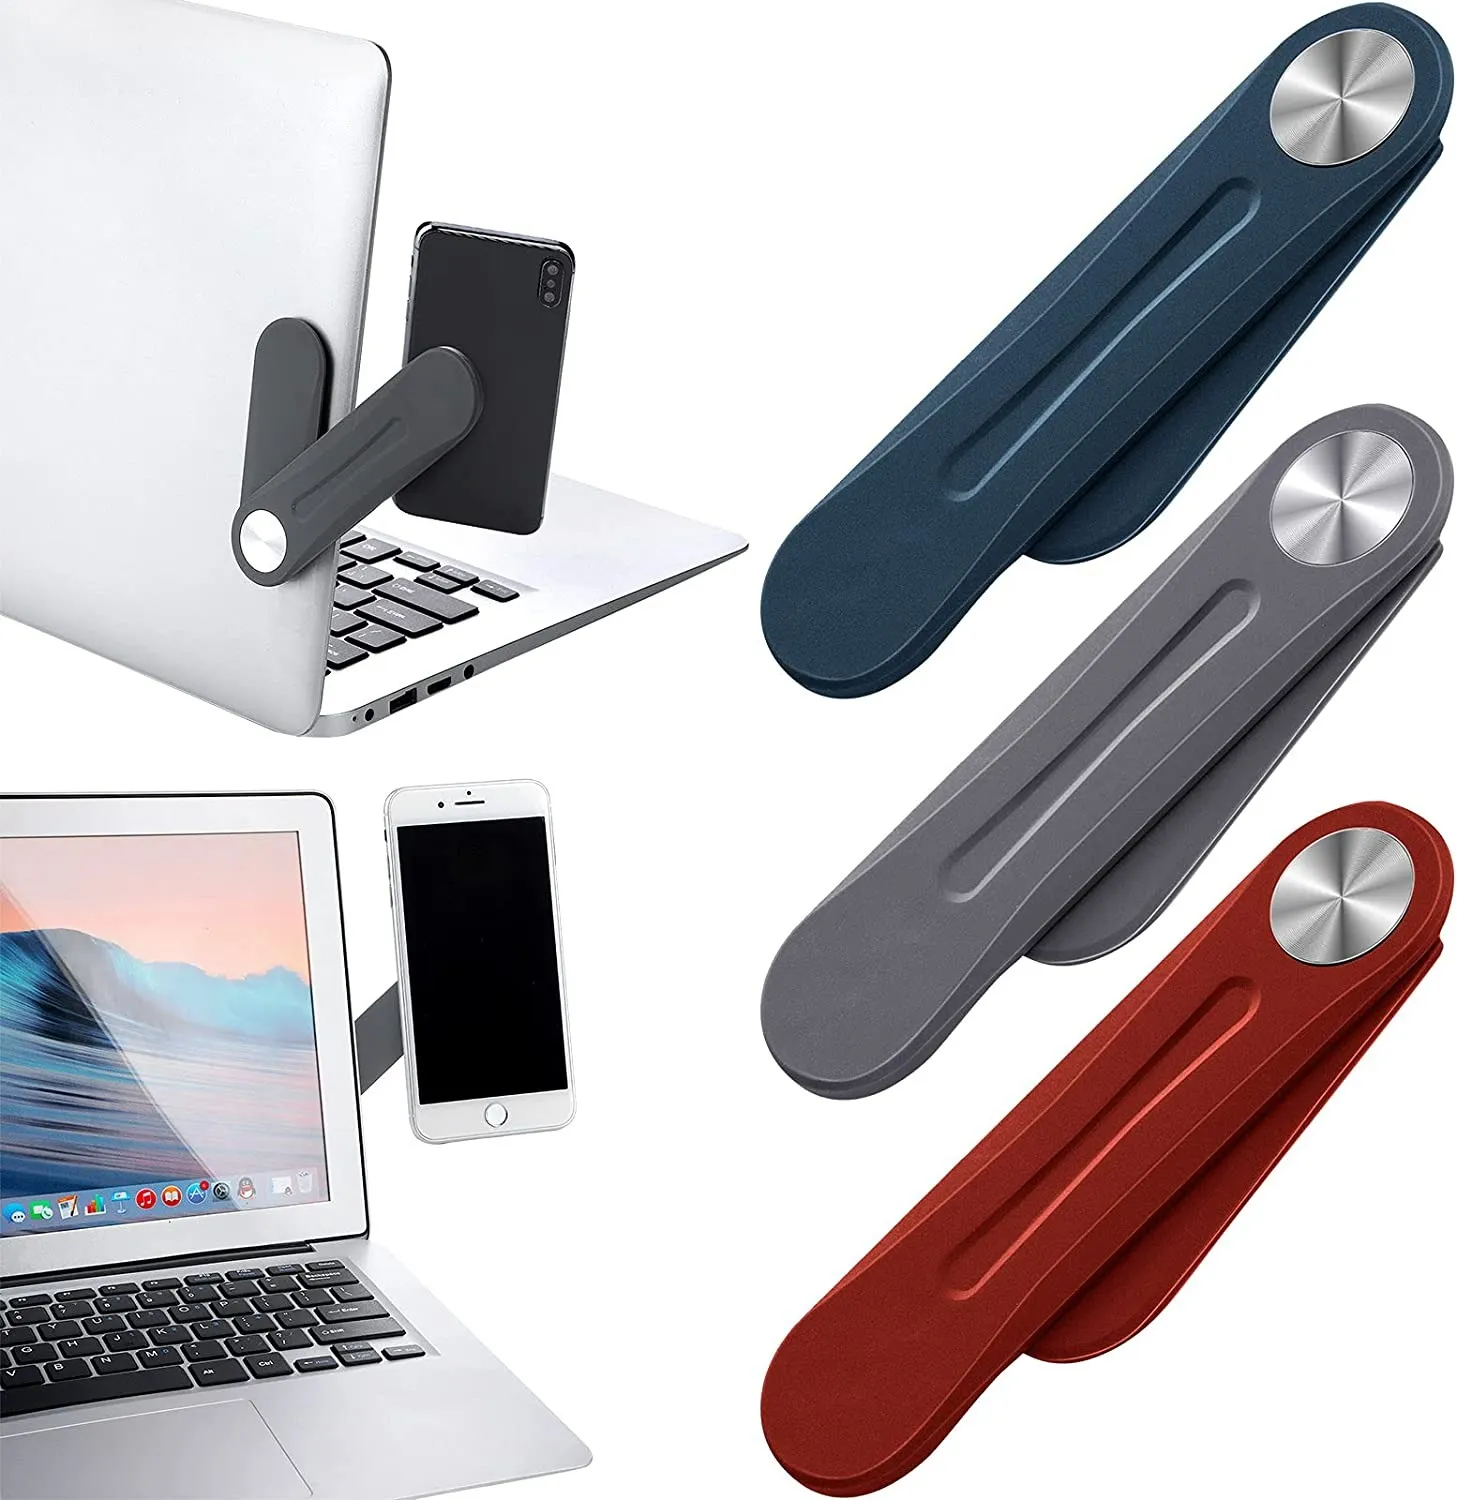 3 Pieces Magnetic Laptop Phone Holder Adjustable Side Mount Clip for Laptop Expansion Stand for Smartphone, Office and Home Enjoying Dual Screen at The Same Time